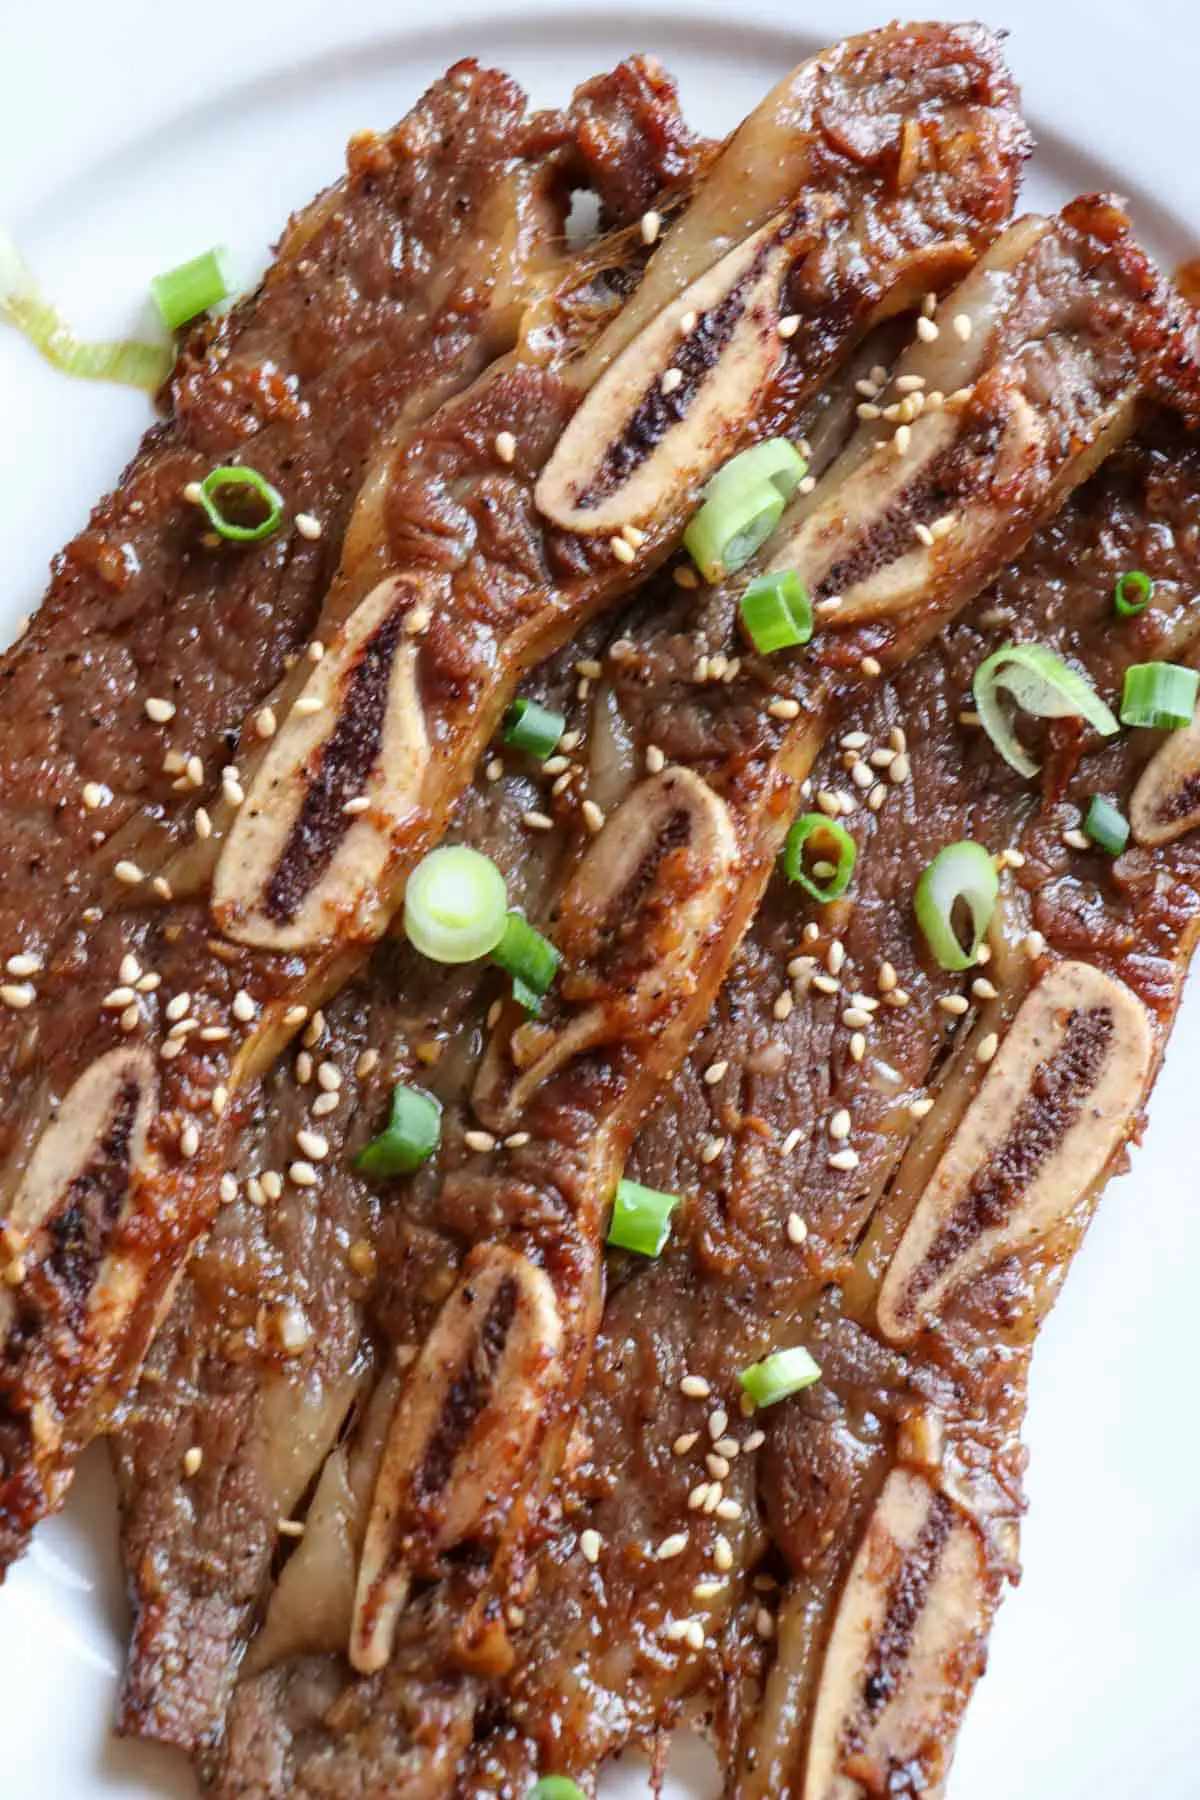 Korean Short Ribs garnished with sesame seeds and green onions on a white plate.